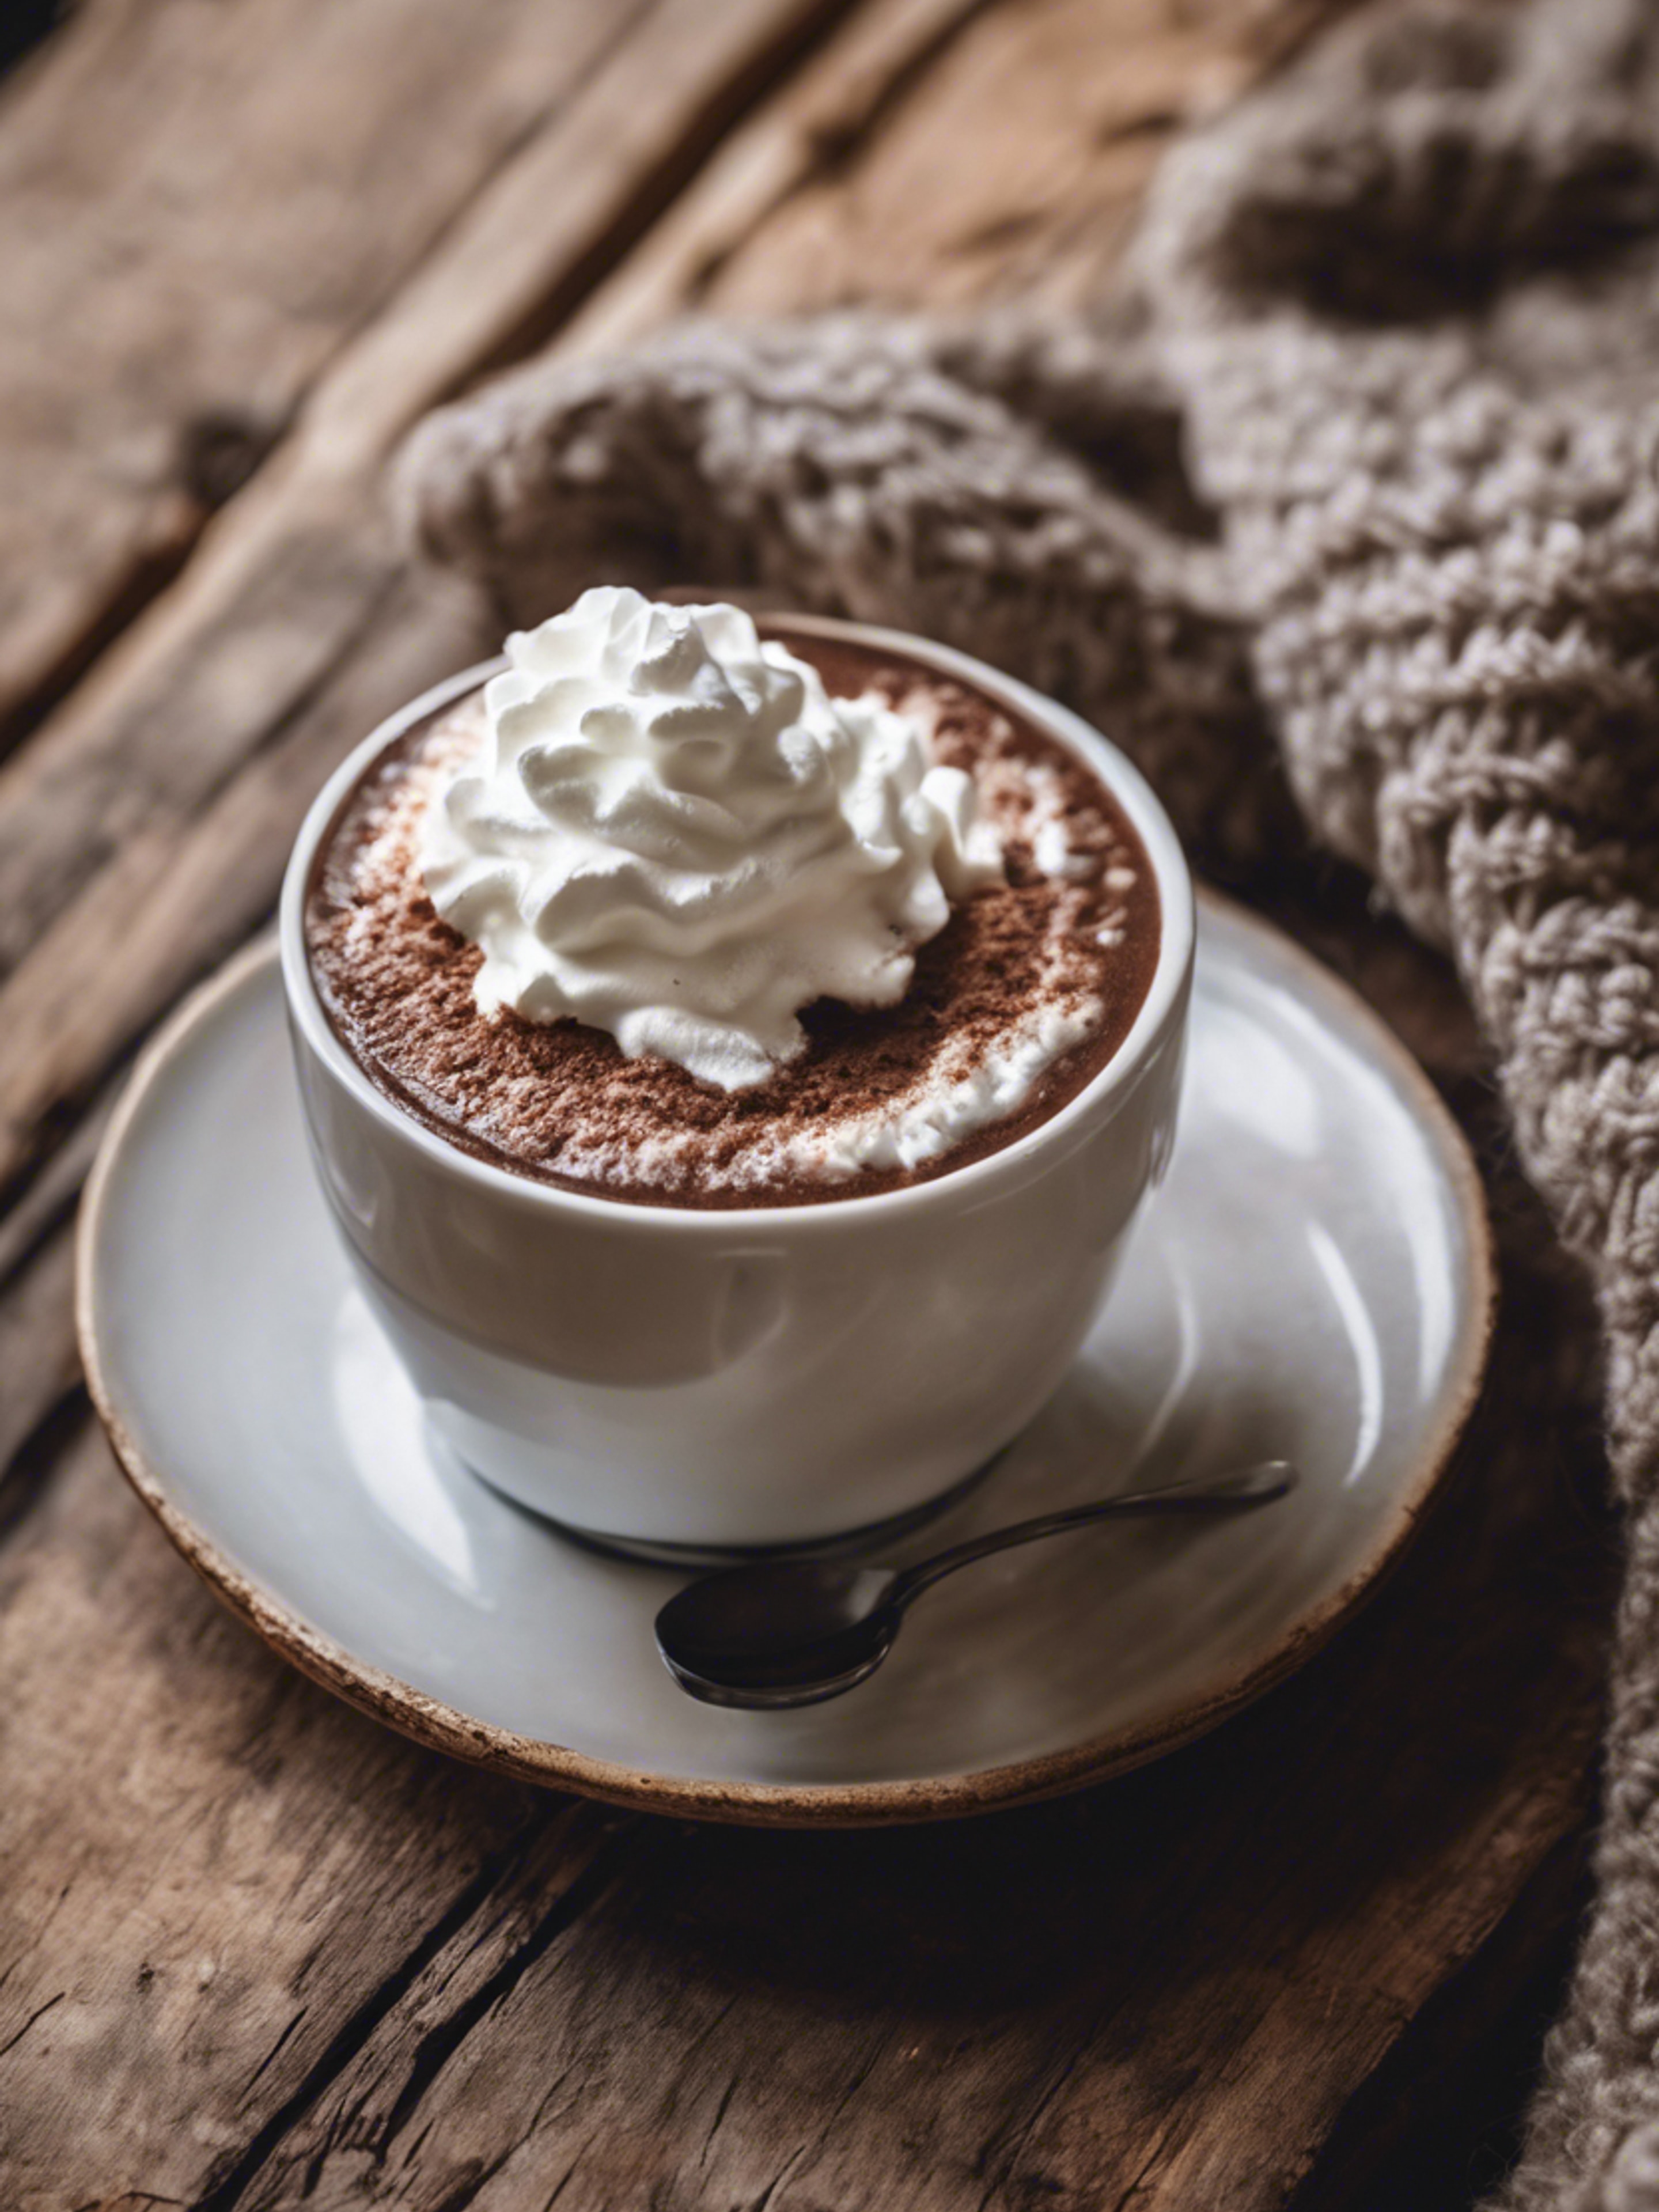 A porcelain cup of steaming hot chocolate topped with whipped cream, next to a crochet coaster on a rough wooden table. Tapet[f8ececc79cde48c88690]